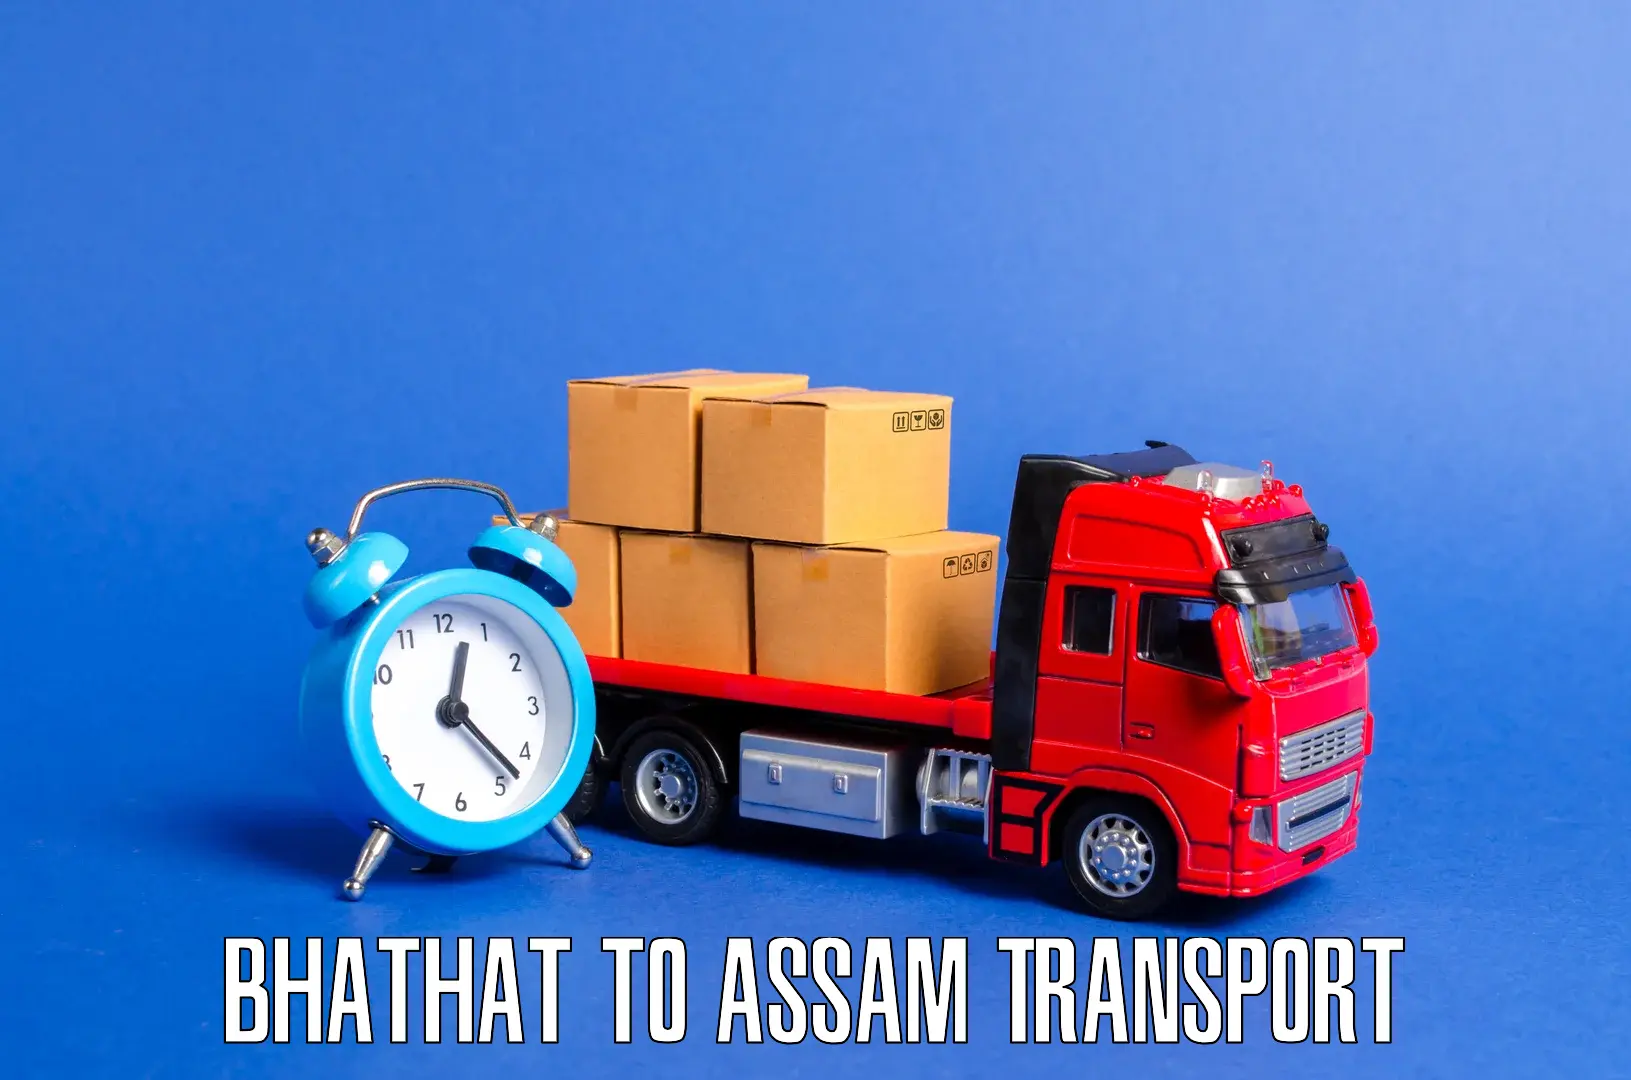 Nearby transport service Bhathat to Guwahati